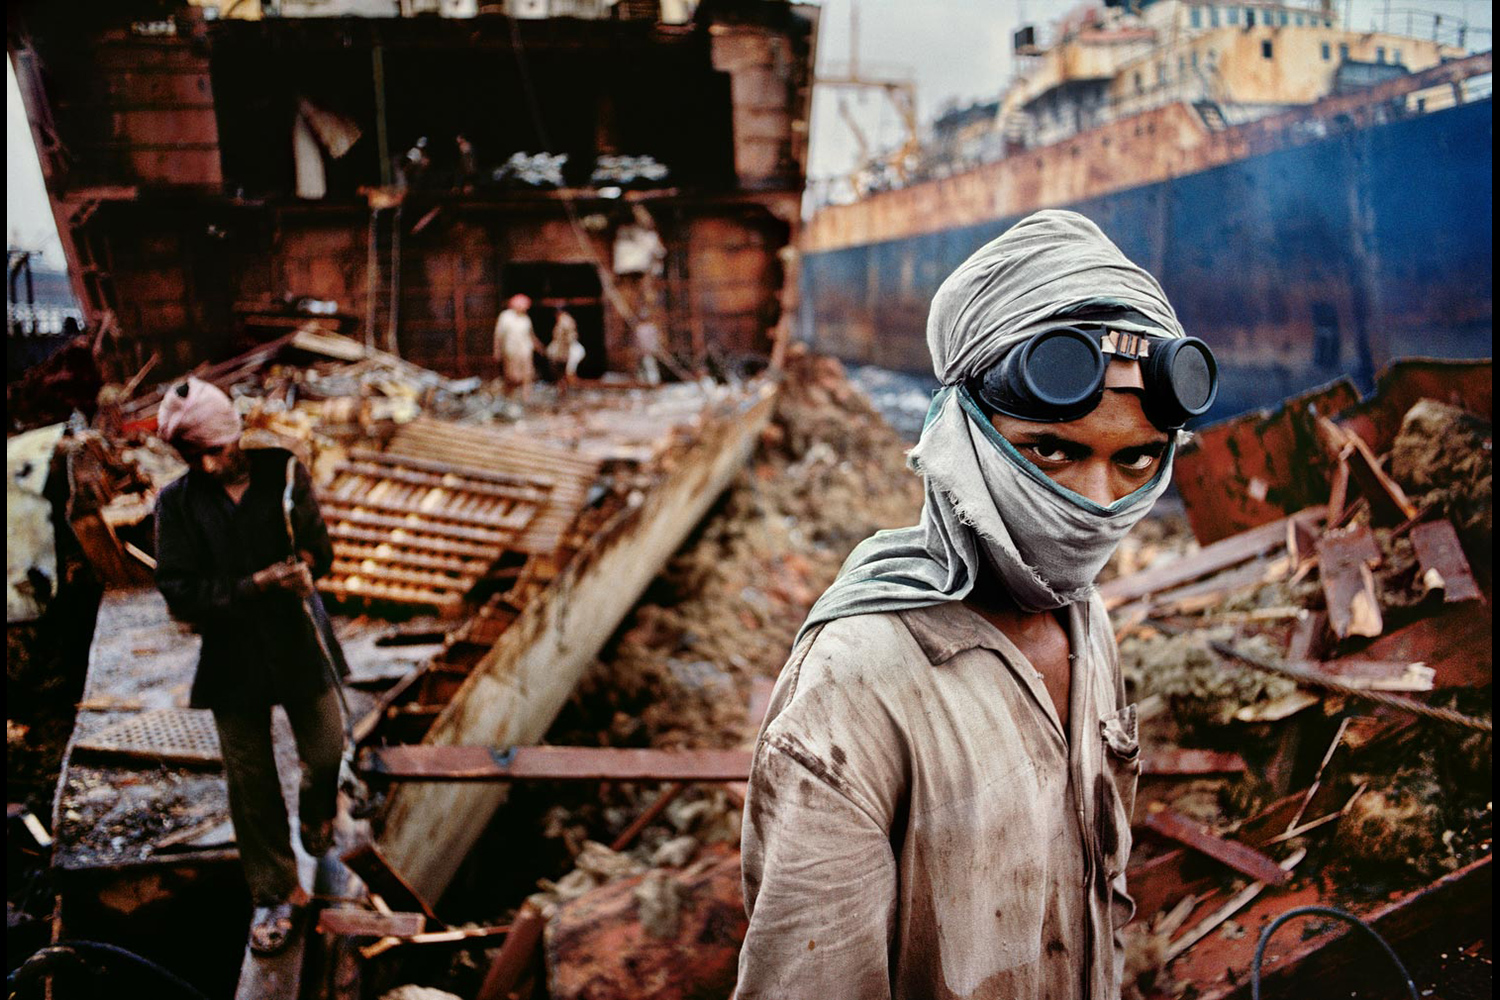 Welder in a ship-breaking yard, Bombay, India, 1994
                              
                              
                              ‘The ships are absolutely huge, and these people are like termites, slowly breaking them down. The vessels are reduced to scrap within three or four months, and then just gone.’